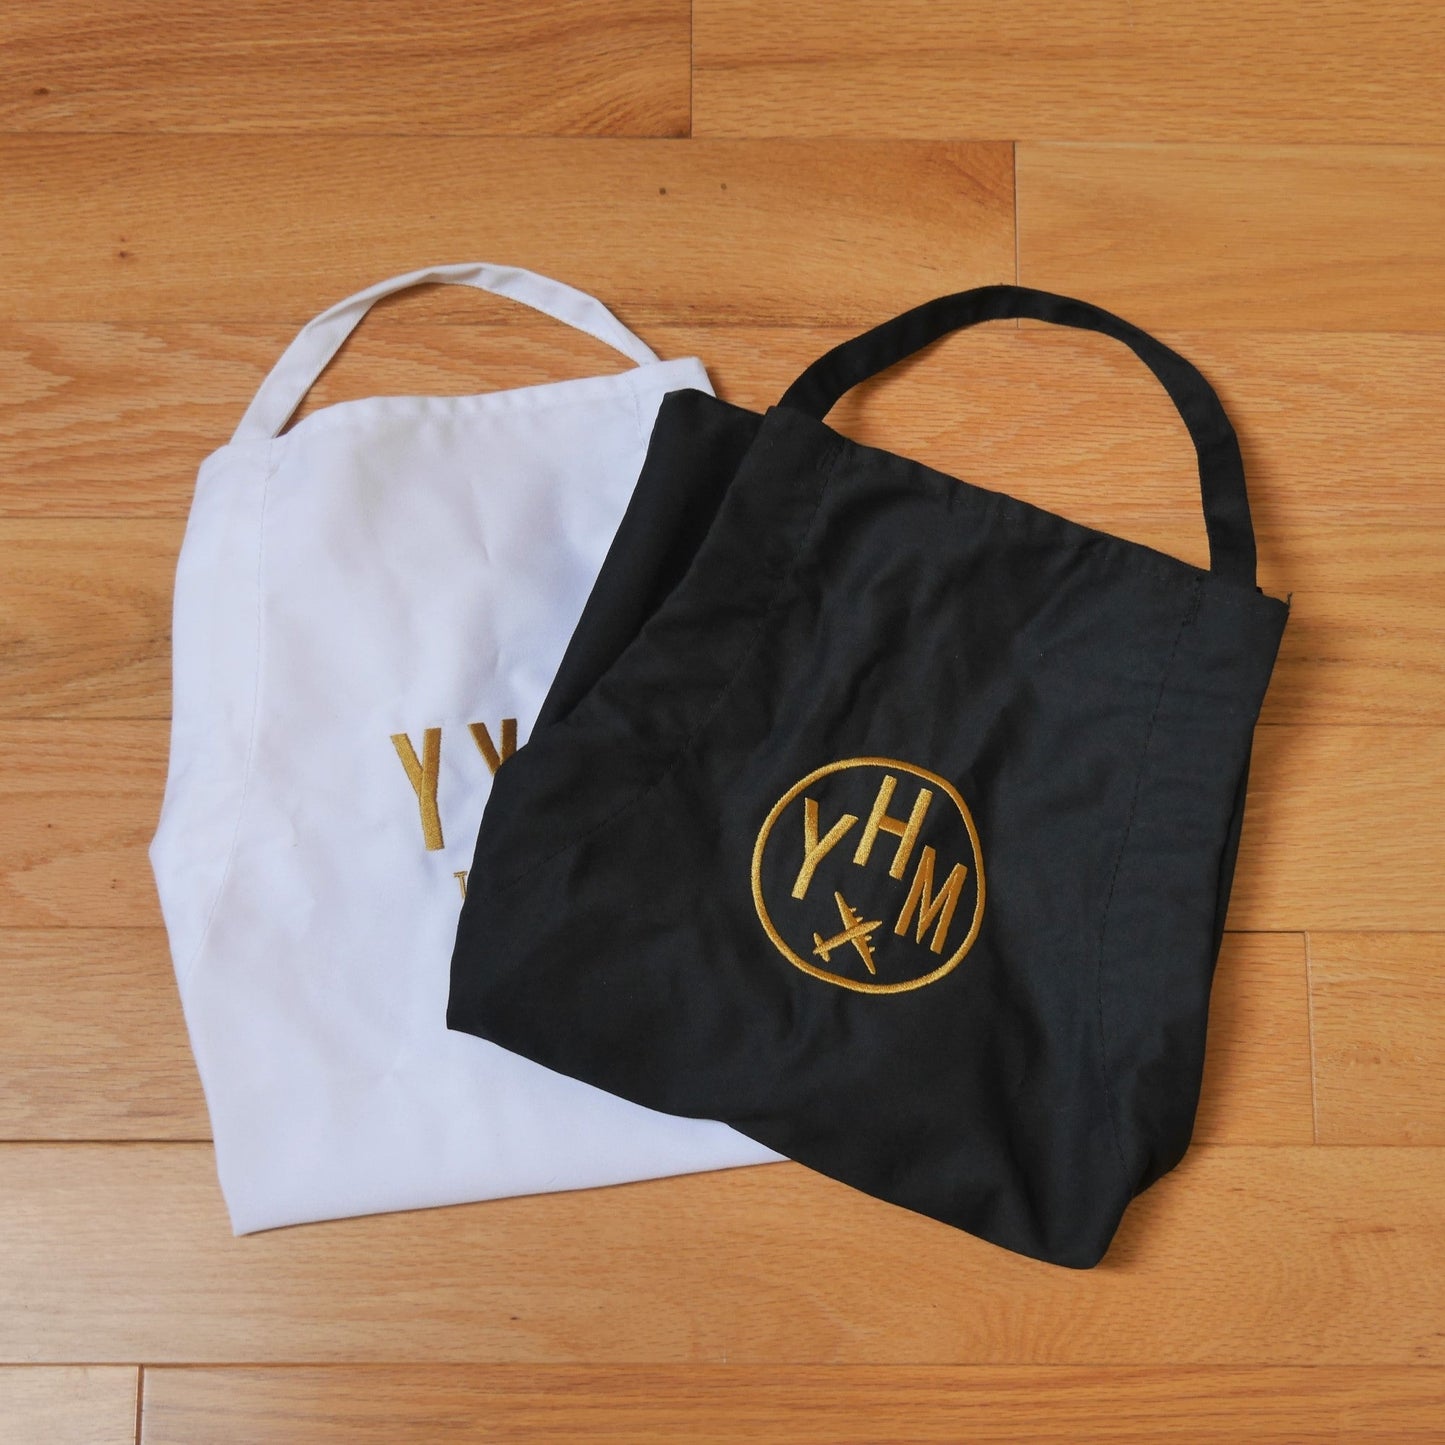 City Embroidered Apron - Old Gold • MAD Madrid • YHM Designs - Image 14